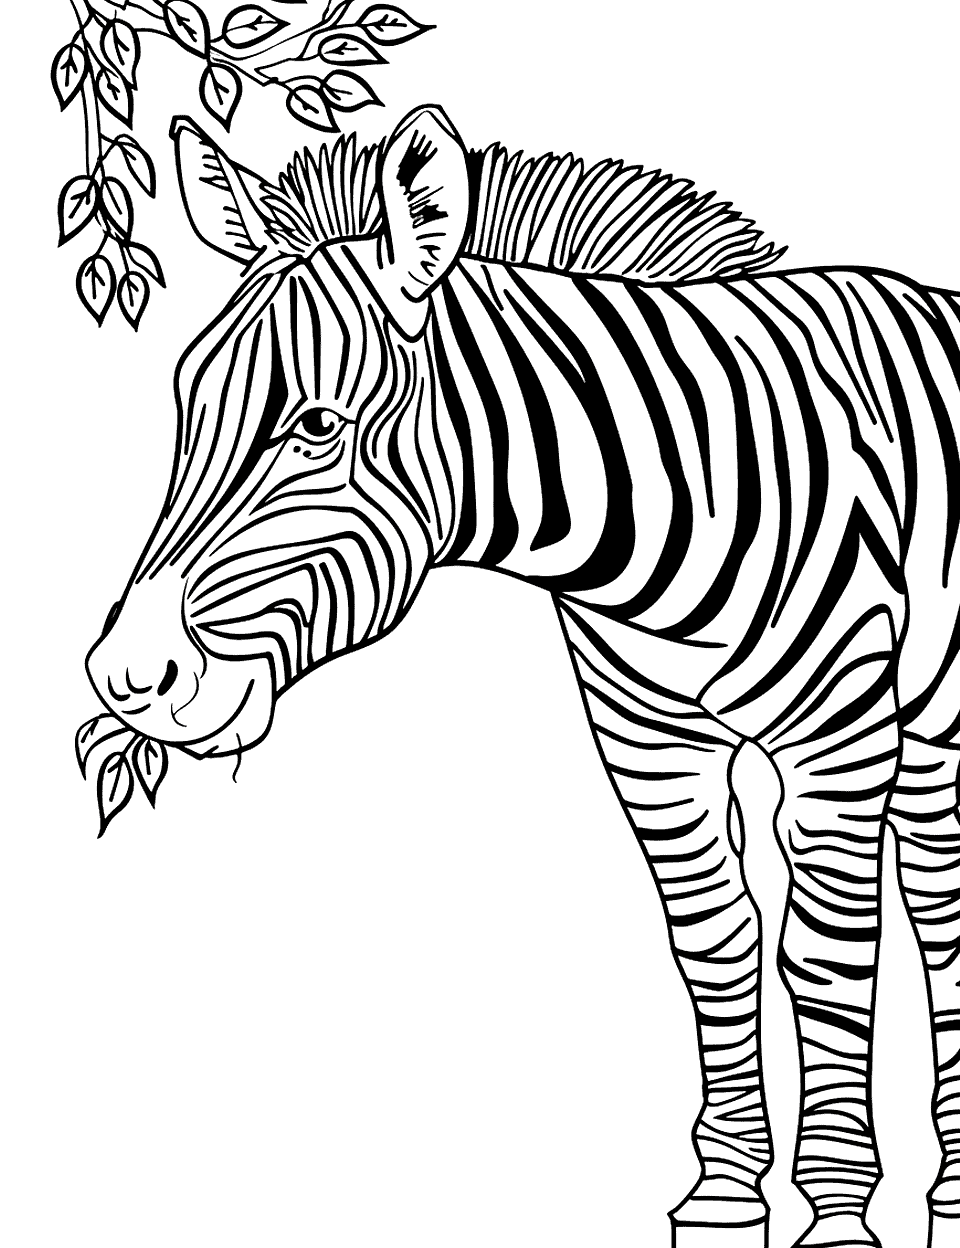 Zebra Eating Leaves Coloring Page - A zebra nibbling leaves from a low-hanging branch.